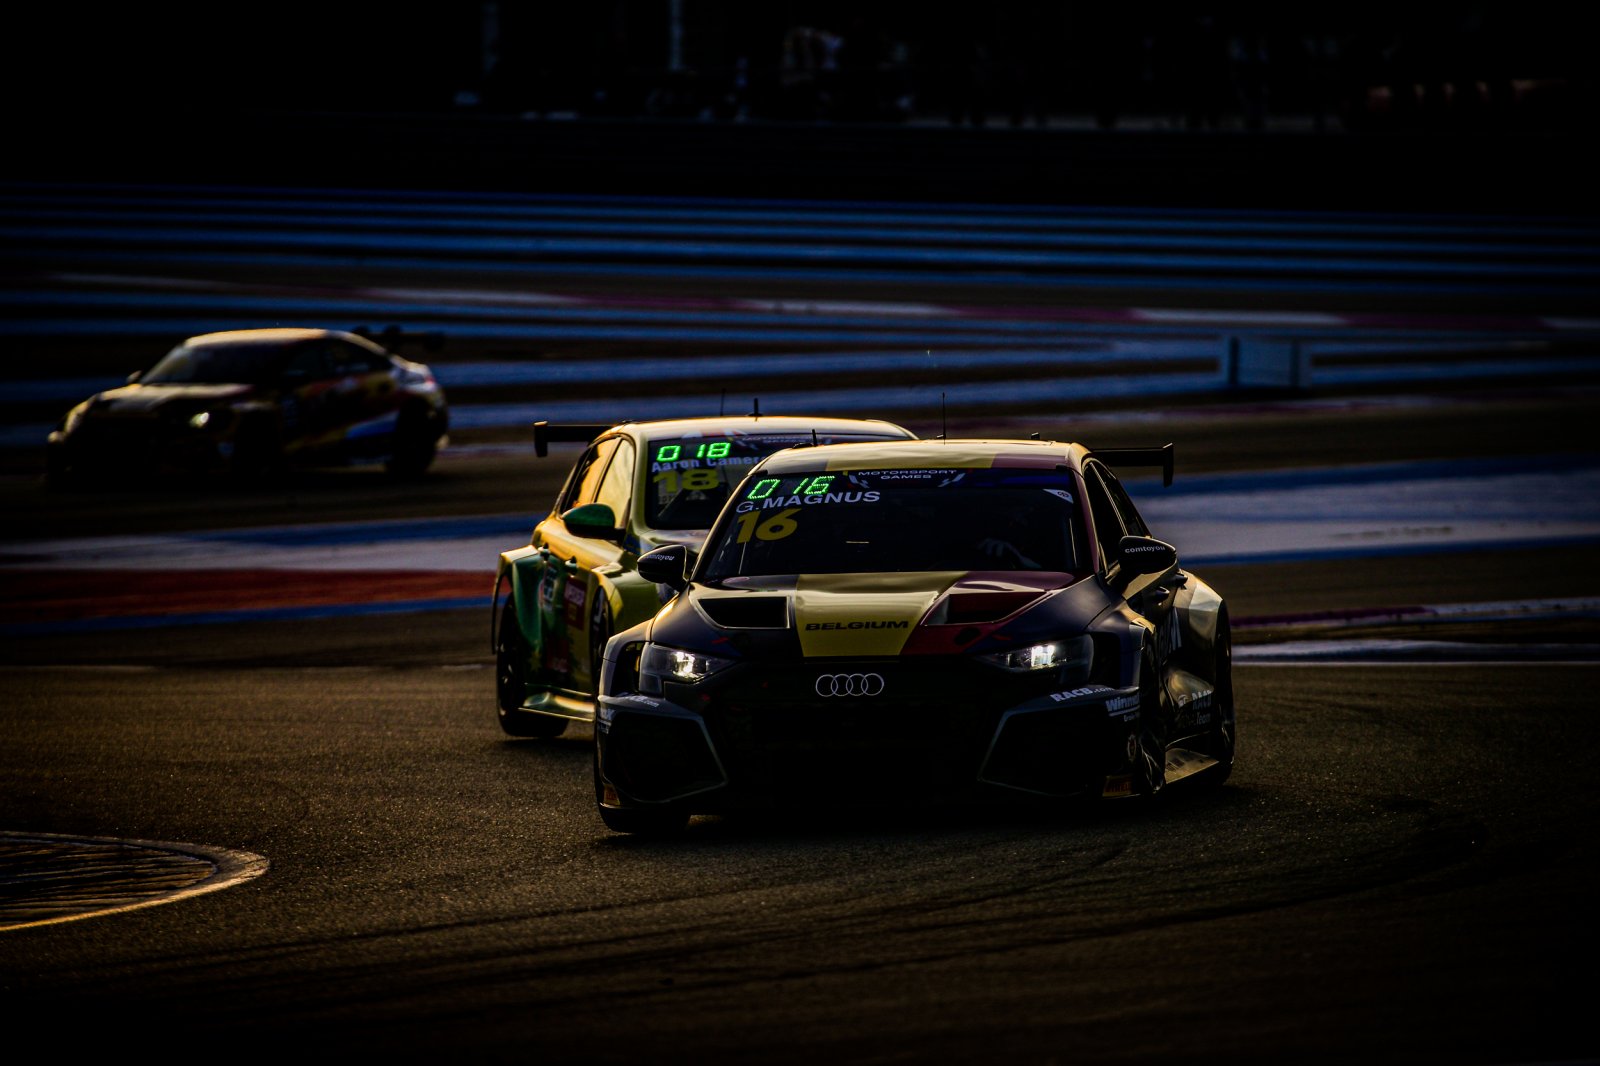 Touring Cars: Netherlands grab the gold medal in dramatic Touring Car final